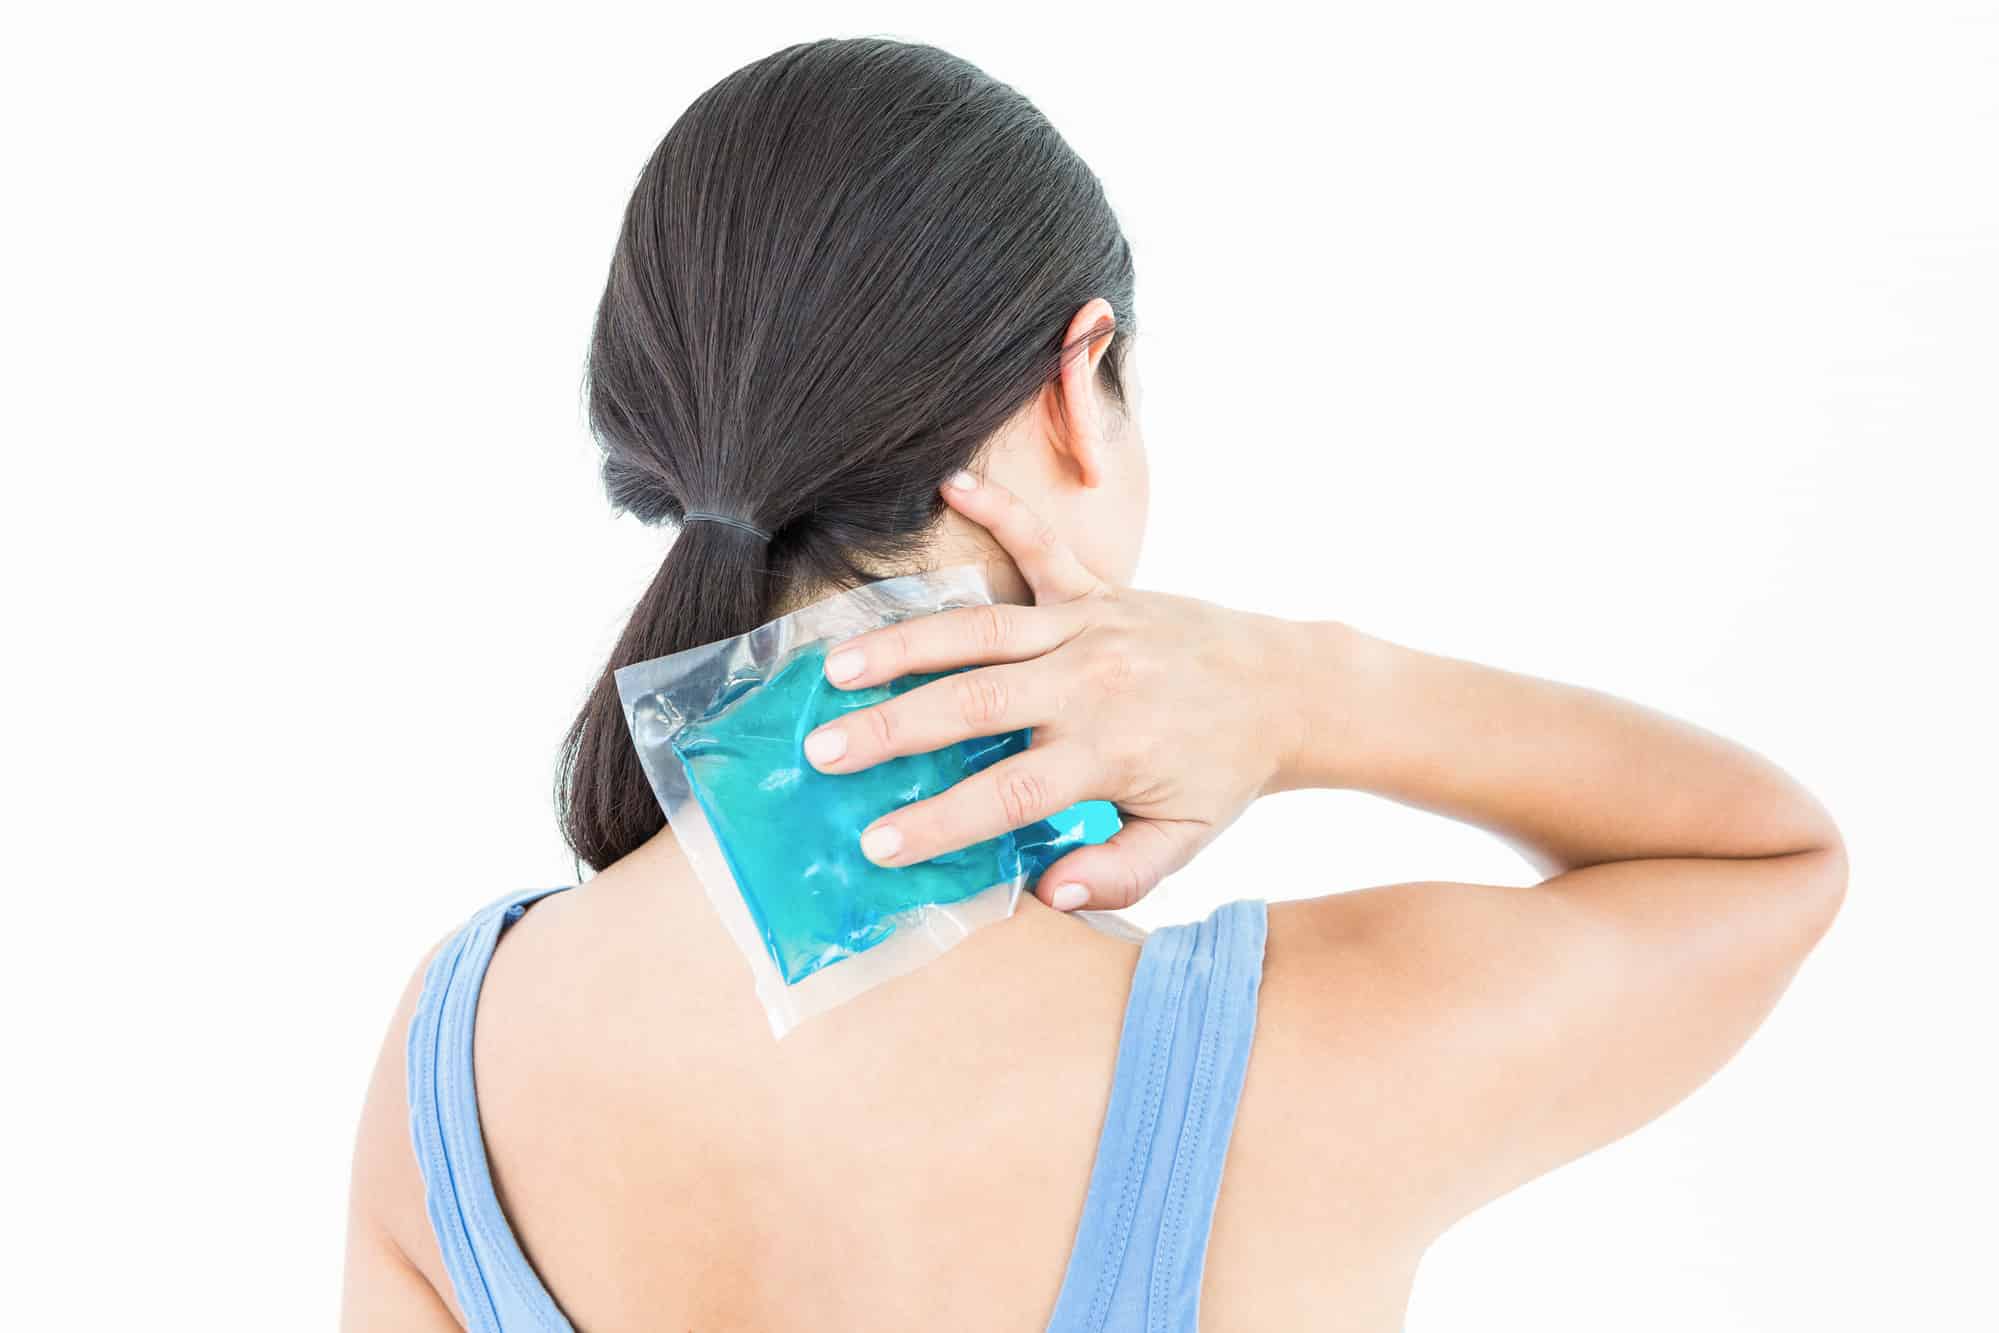 Are You Worried About Your Neck Pain?